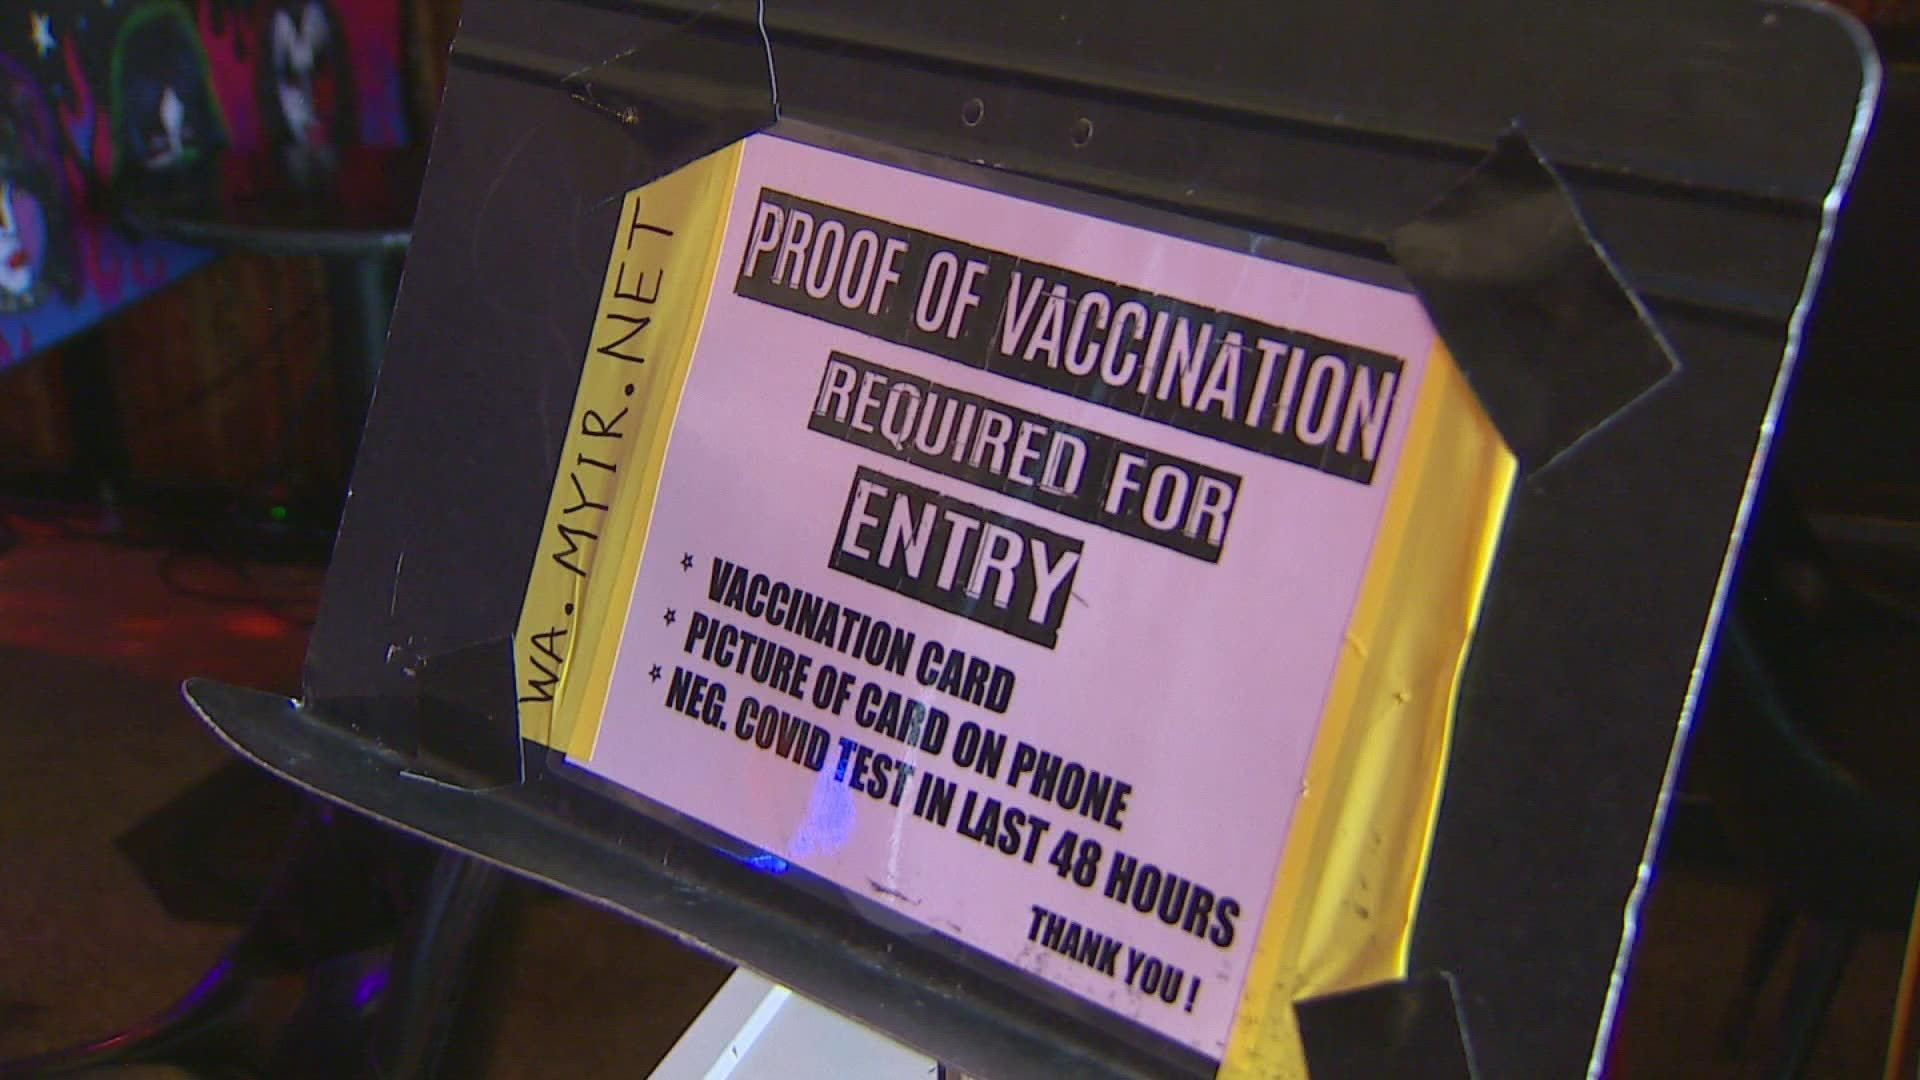 If a King County business chooses not to check your COVID-19 vaccine status, it could now face hefty fines.